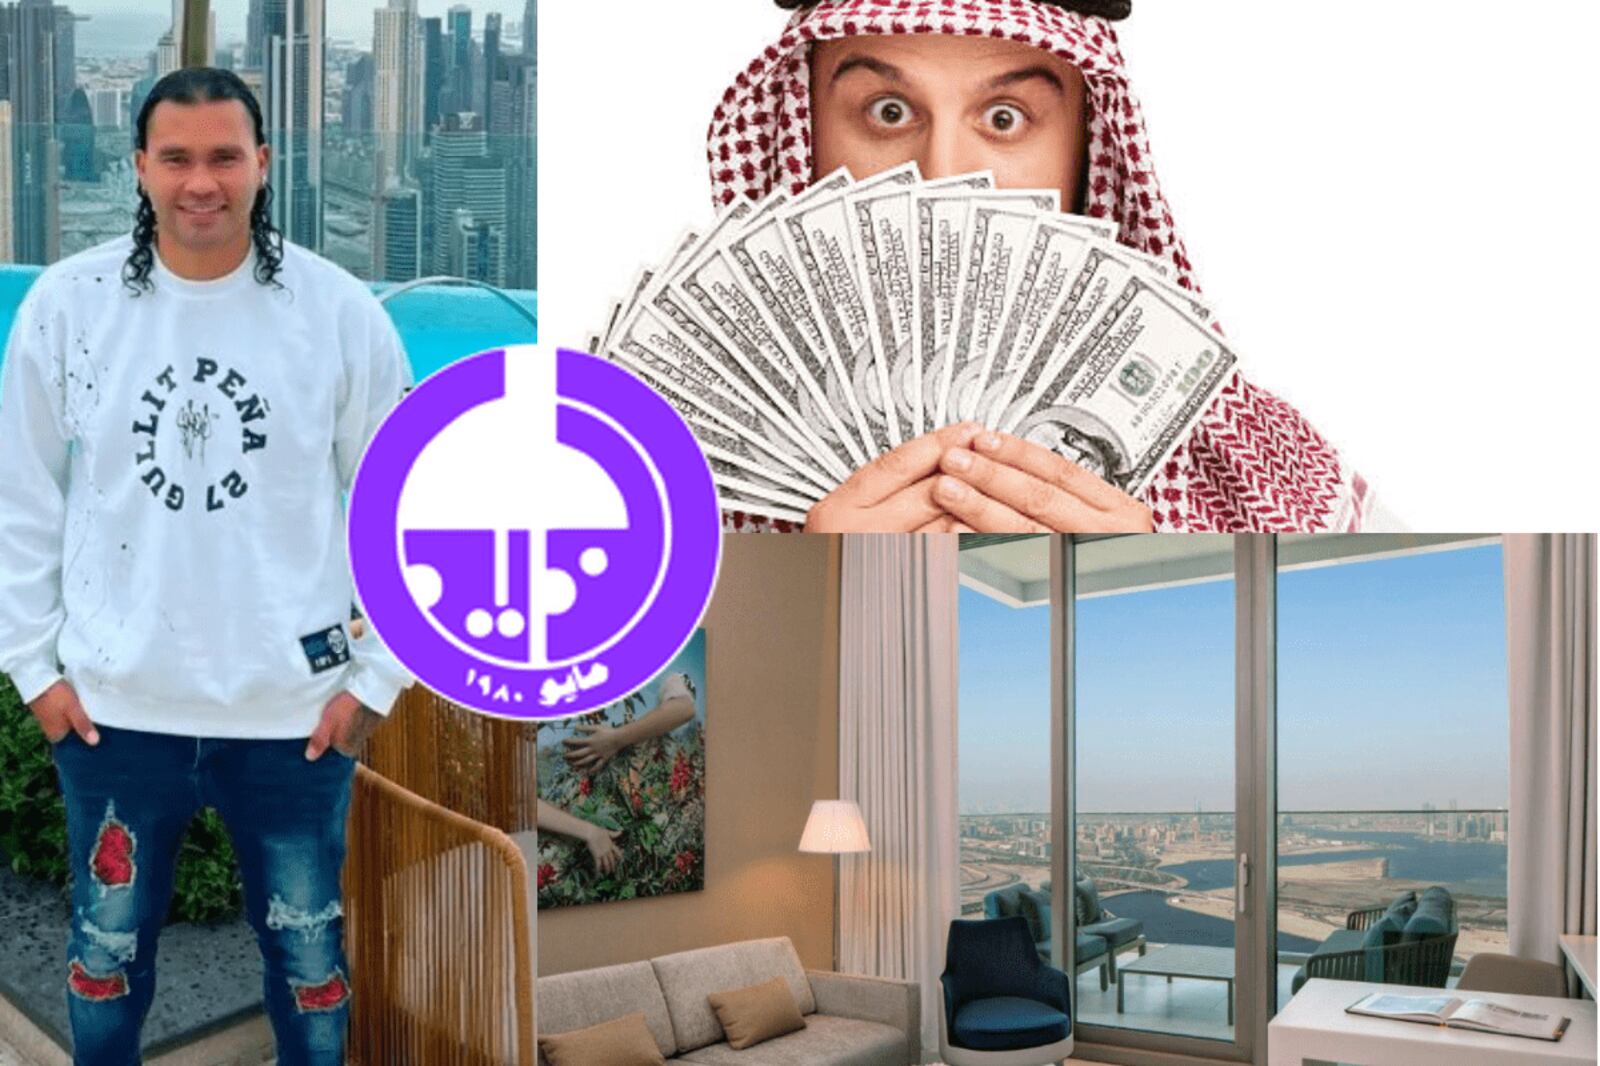 He lived in a $10,000 house, what Gullit Peña pays in a luxury hotel in Dubai